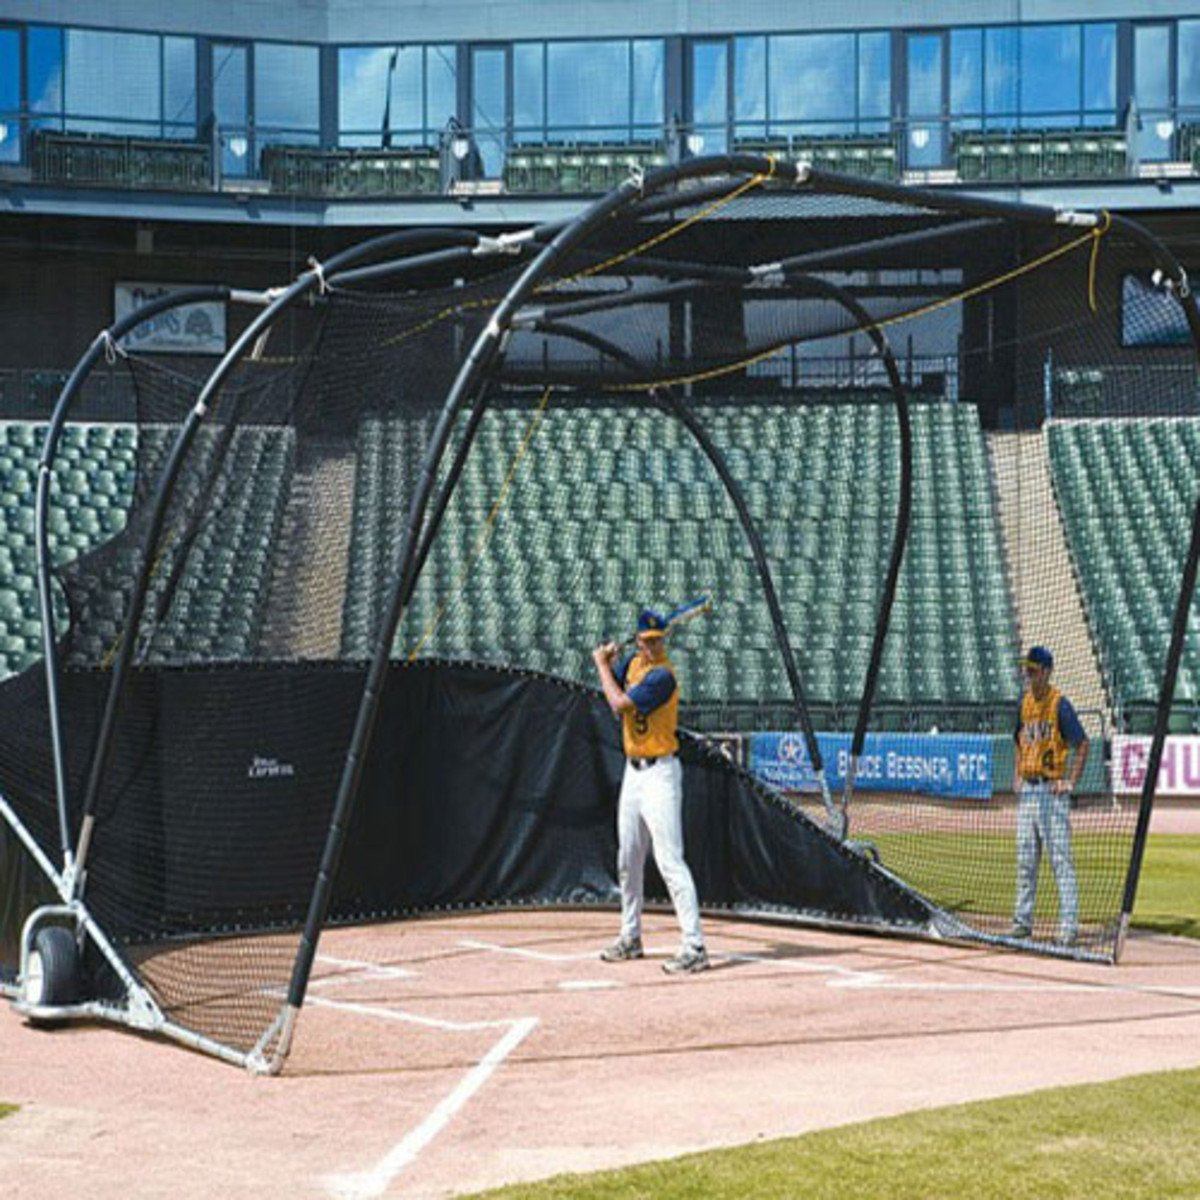 big bubba elite backstop side angle with batter in box